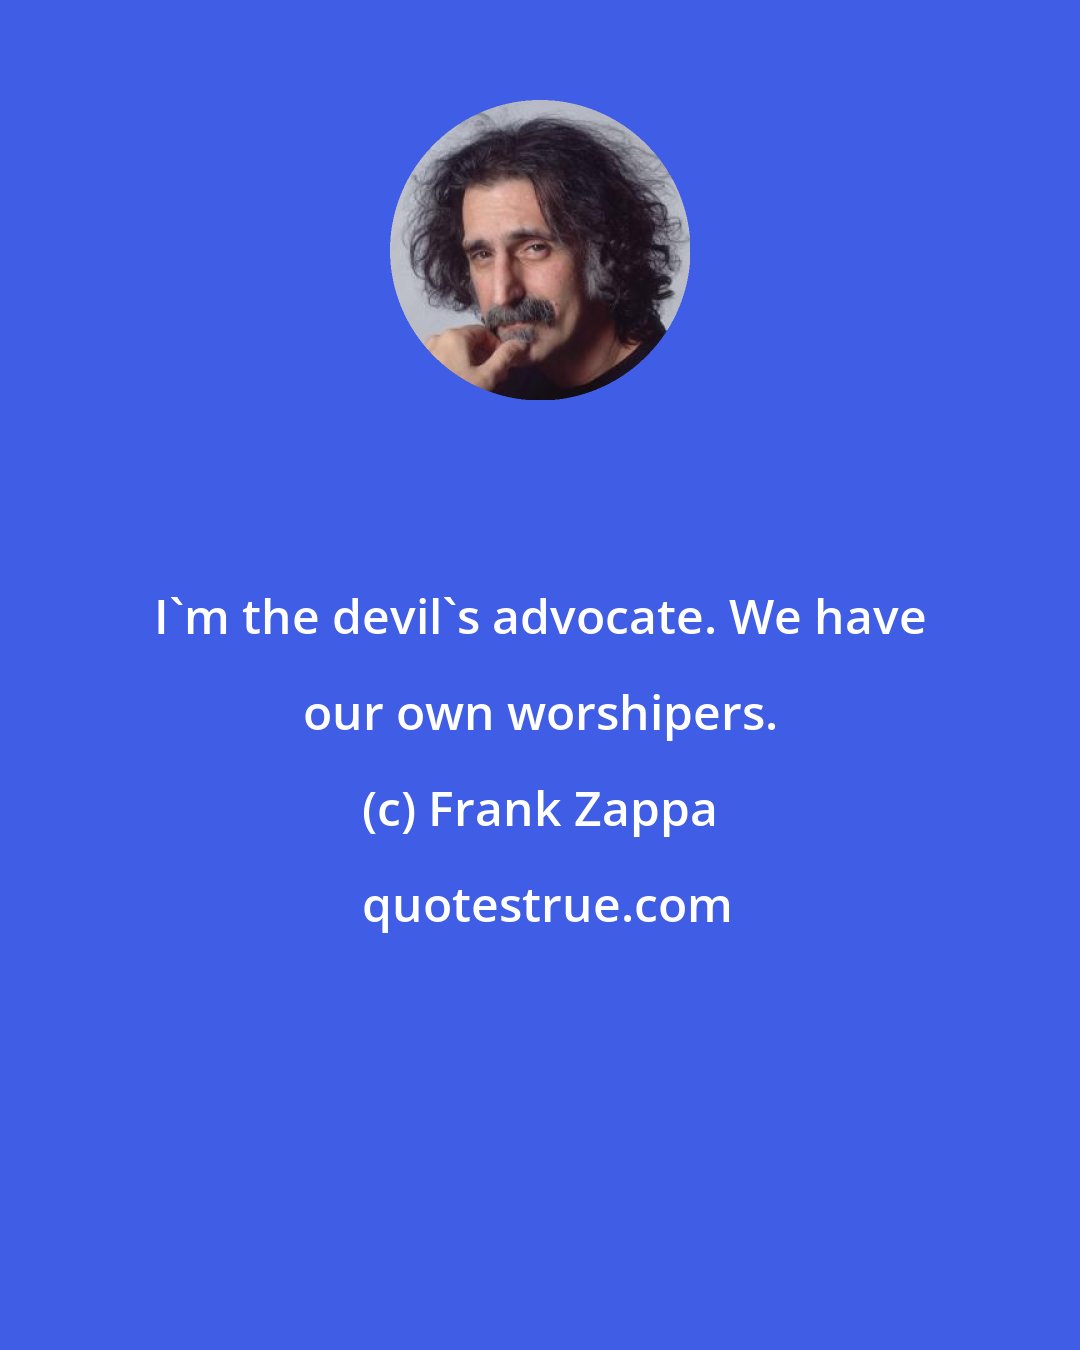 Frank Zappa: I'm the devil's advocate. We have our own worshipers.